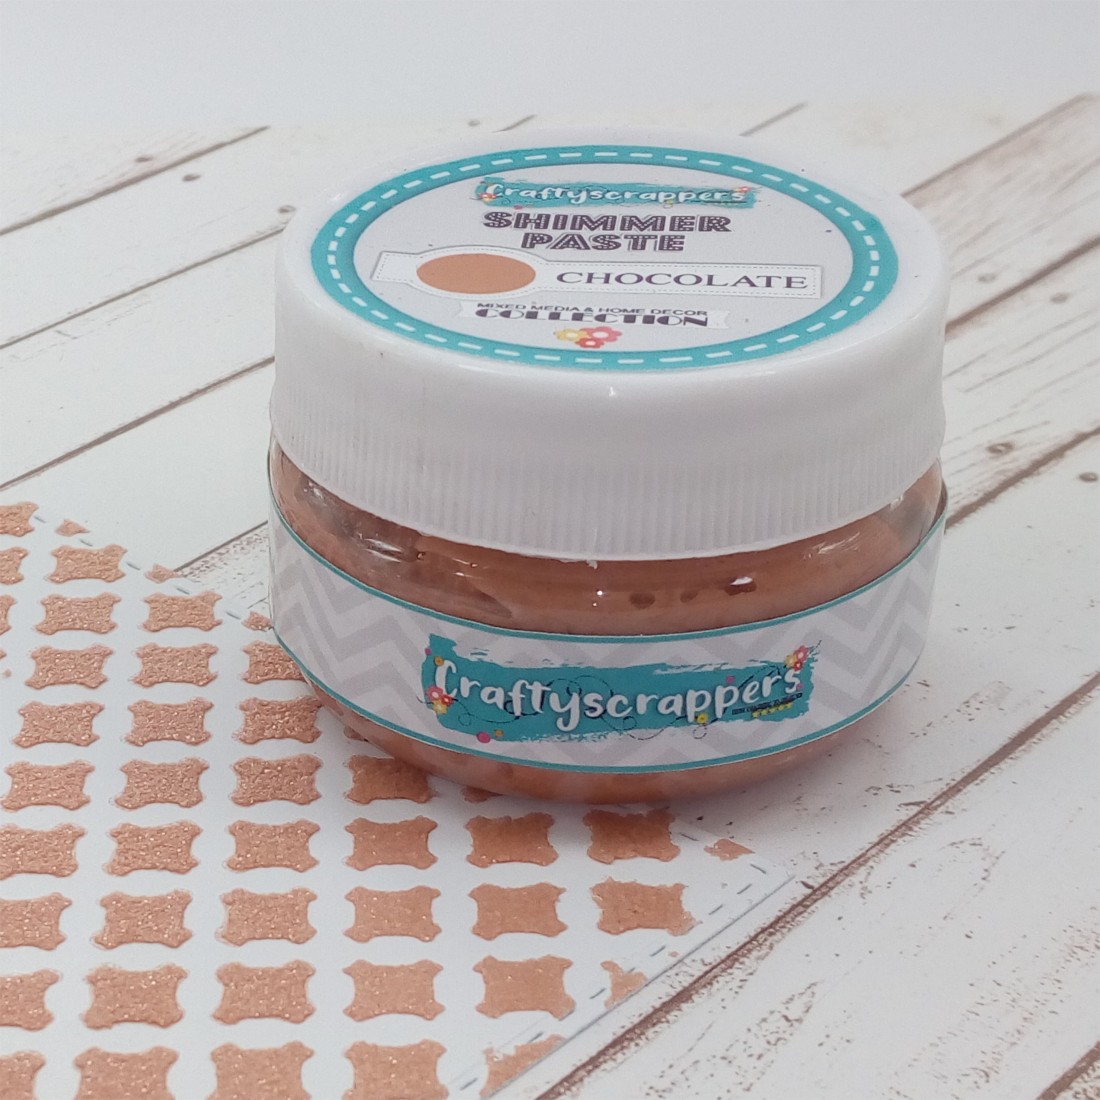 Craftyscrappers ShimmerPaste- CHOCOLATE